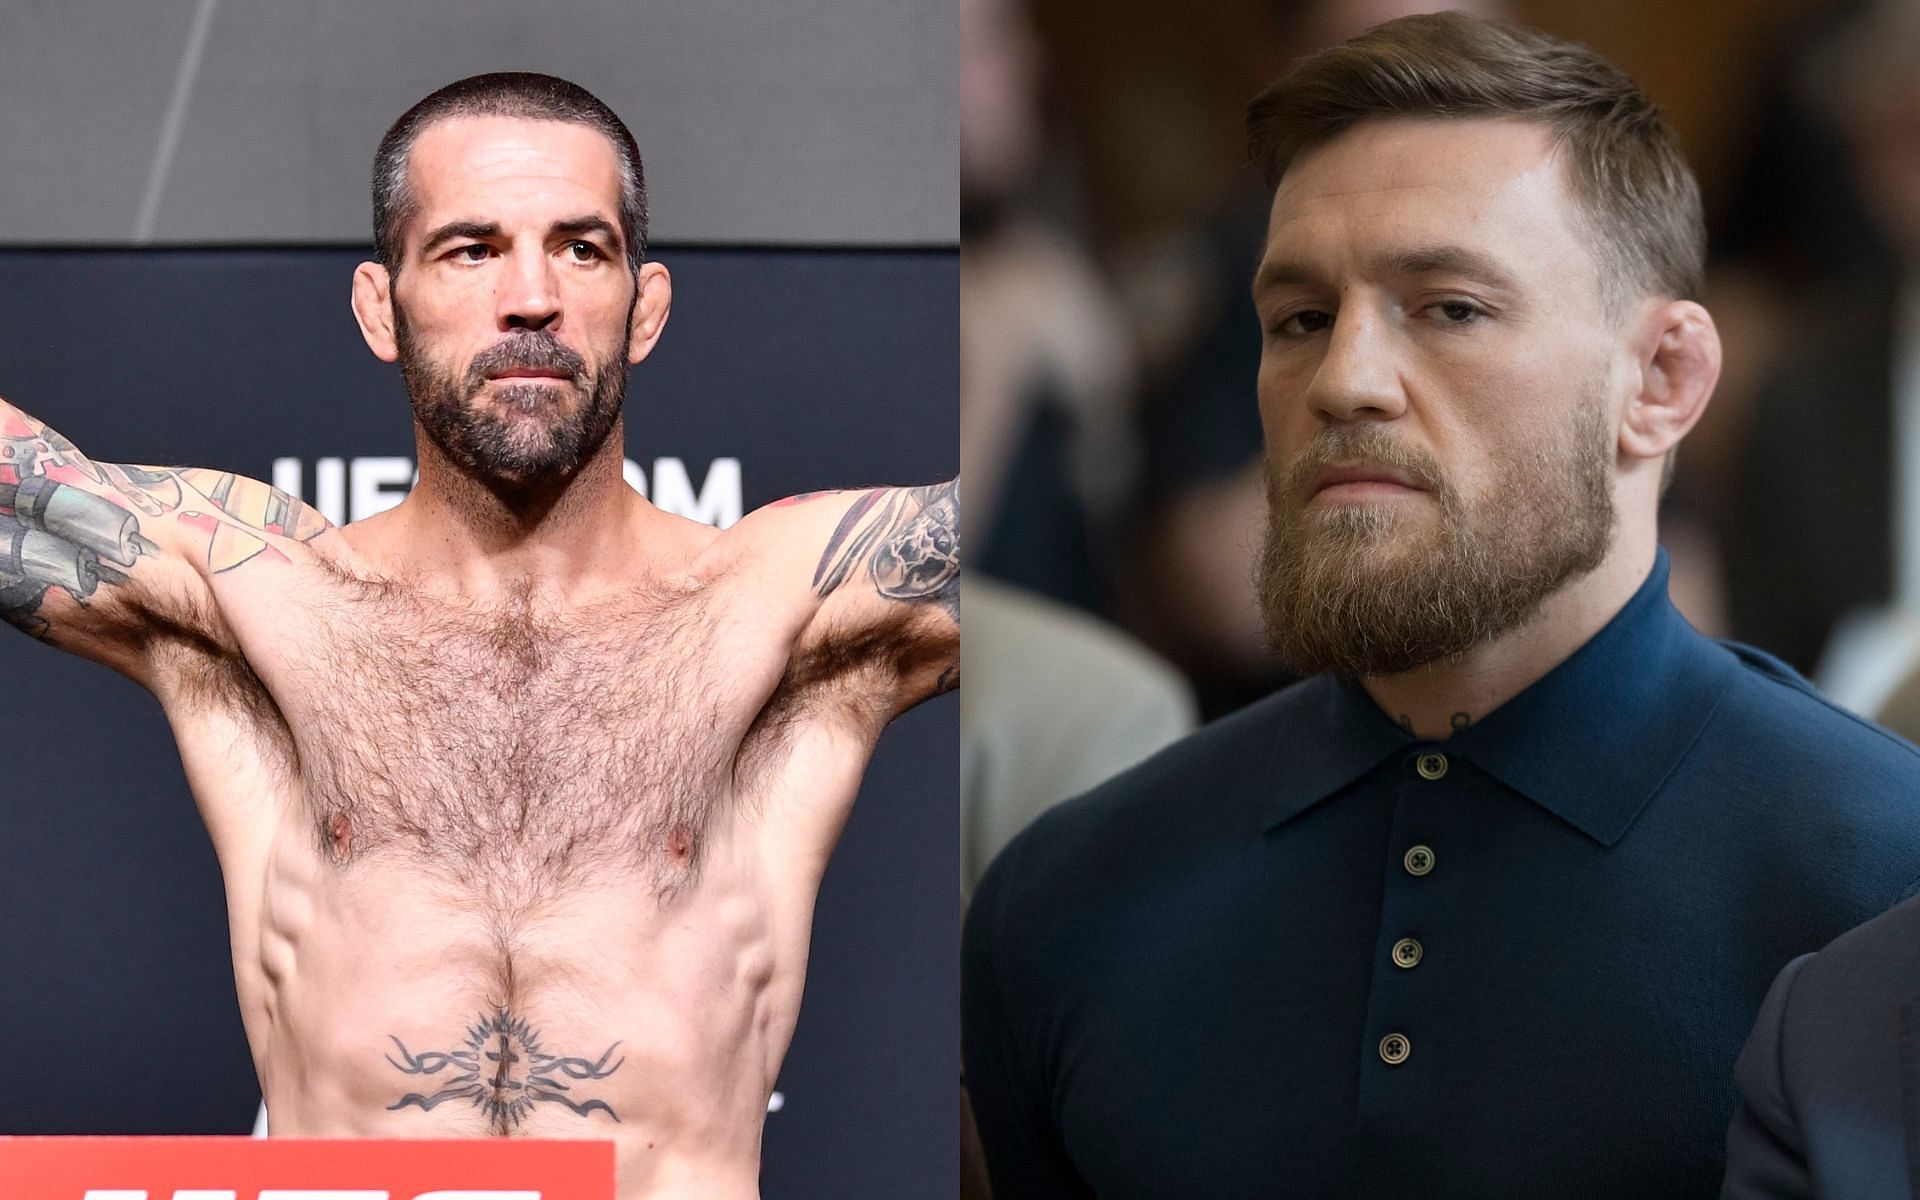 Matt Brown (left) and Conor McGregor (right) (Image credits Getty Images)